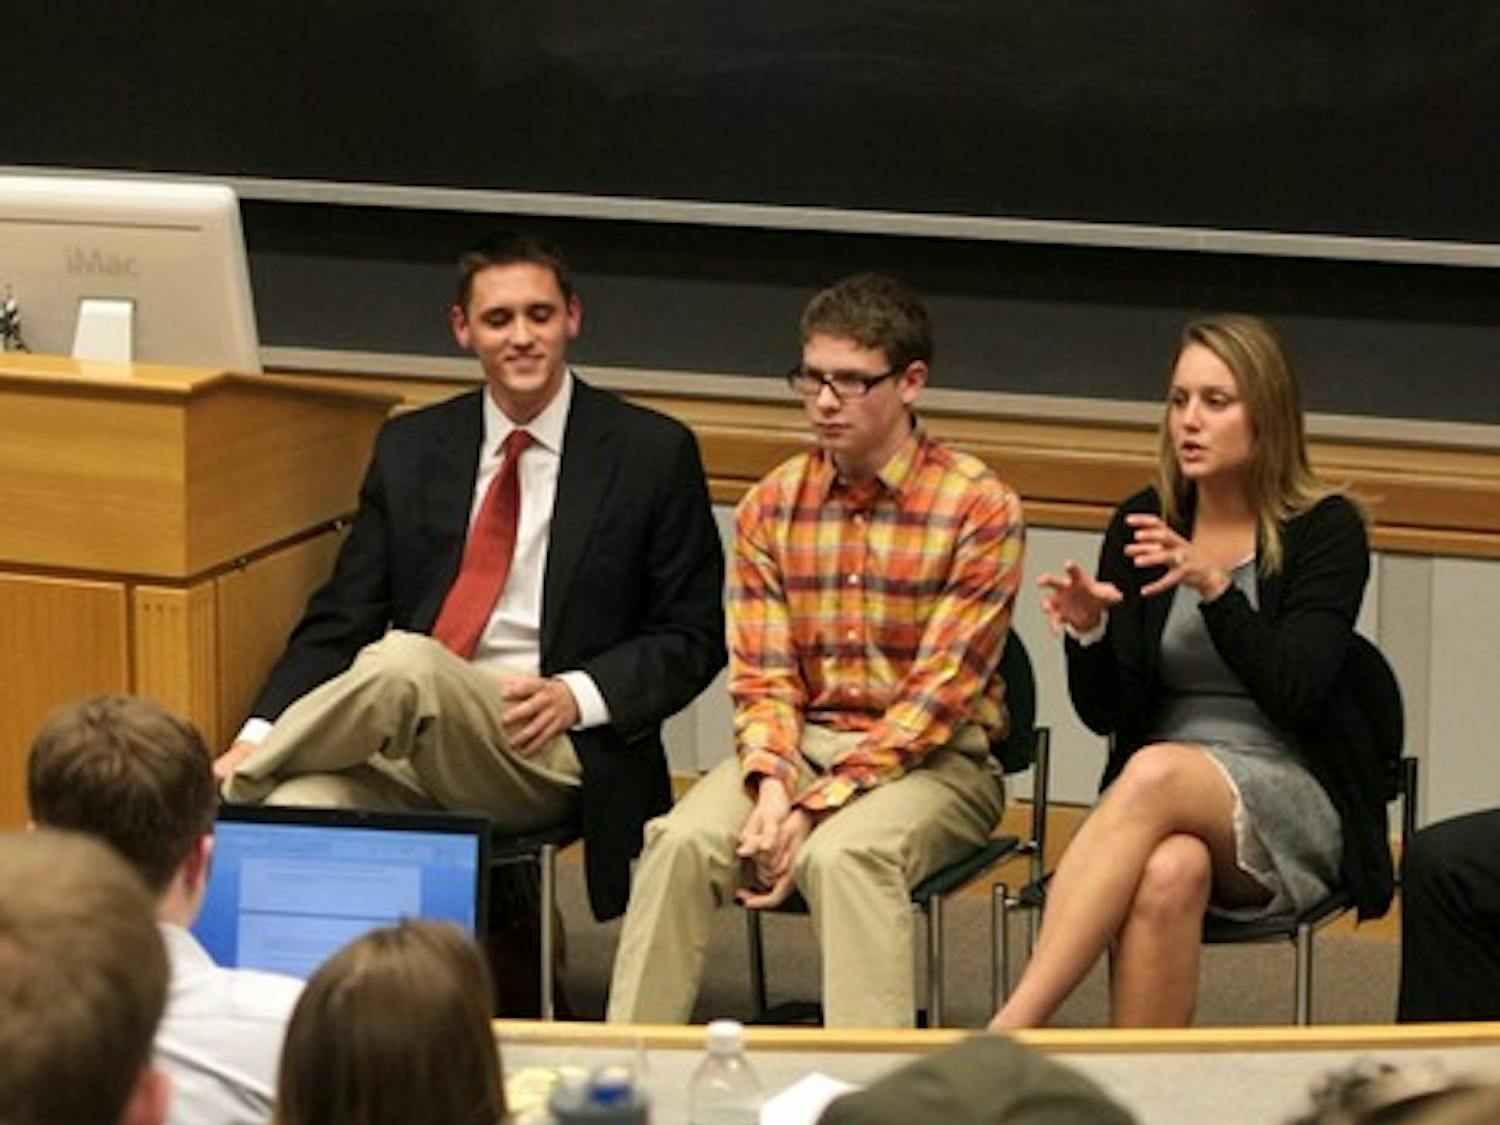 The candidates gathered for the second debate of the Student Assembly election season on Tuesday night.